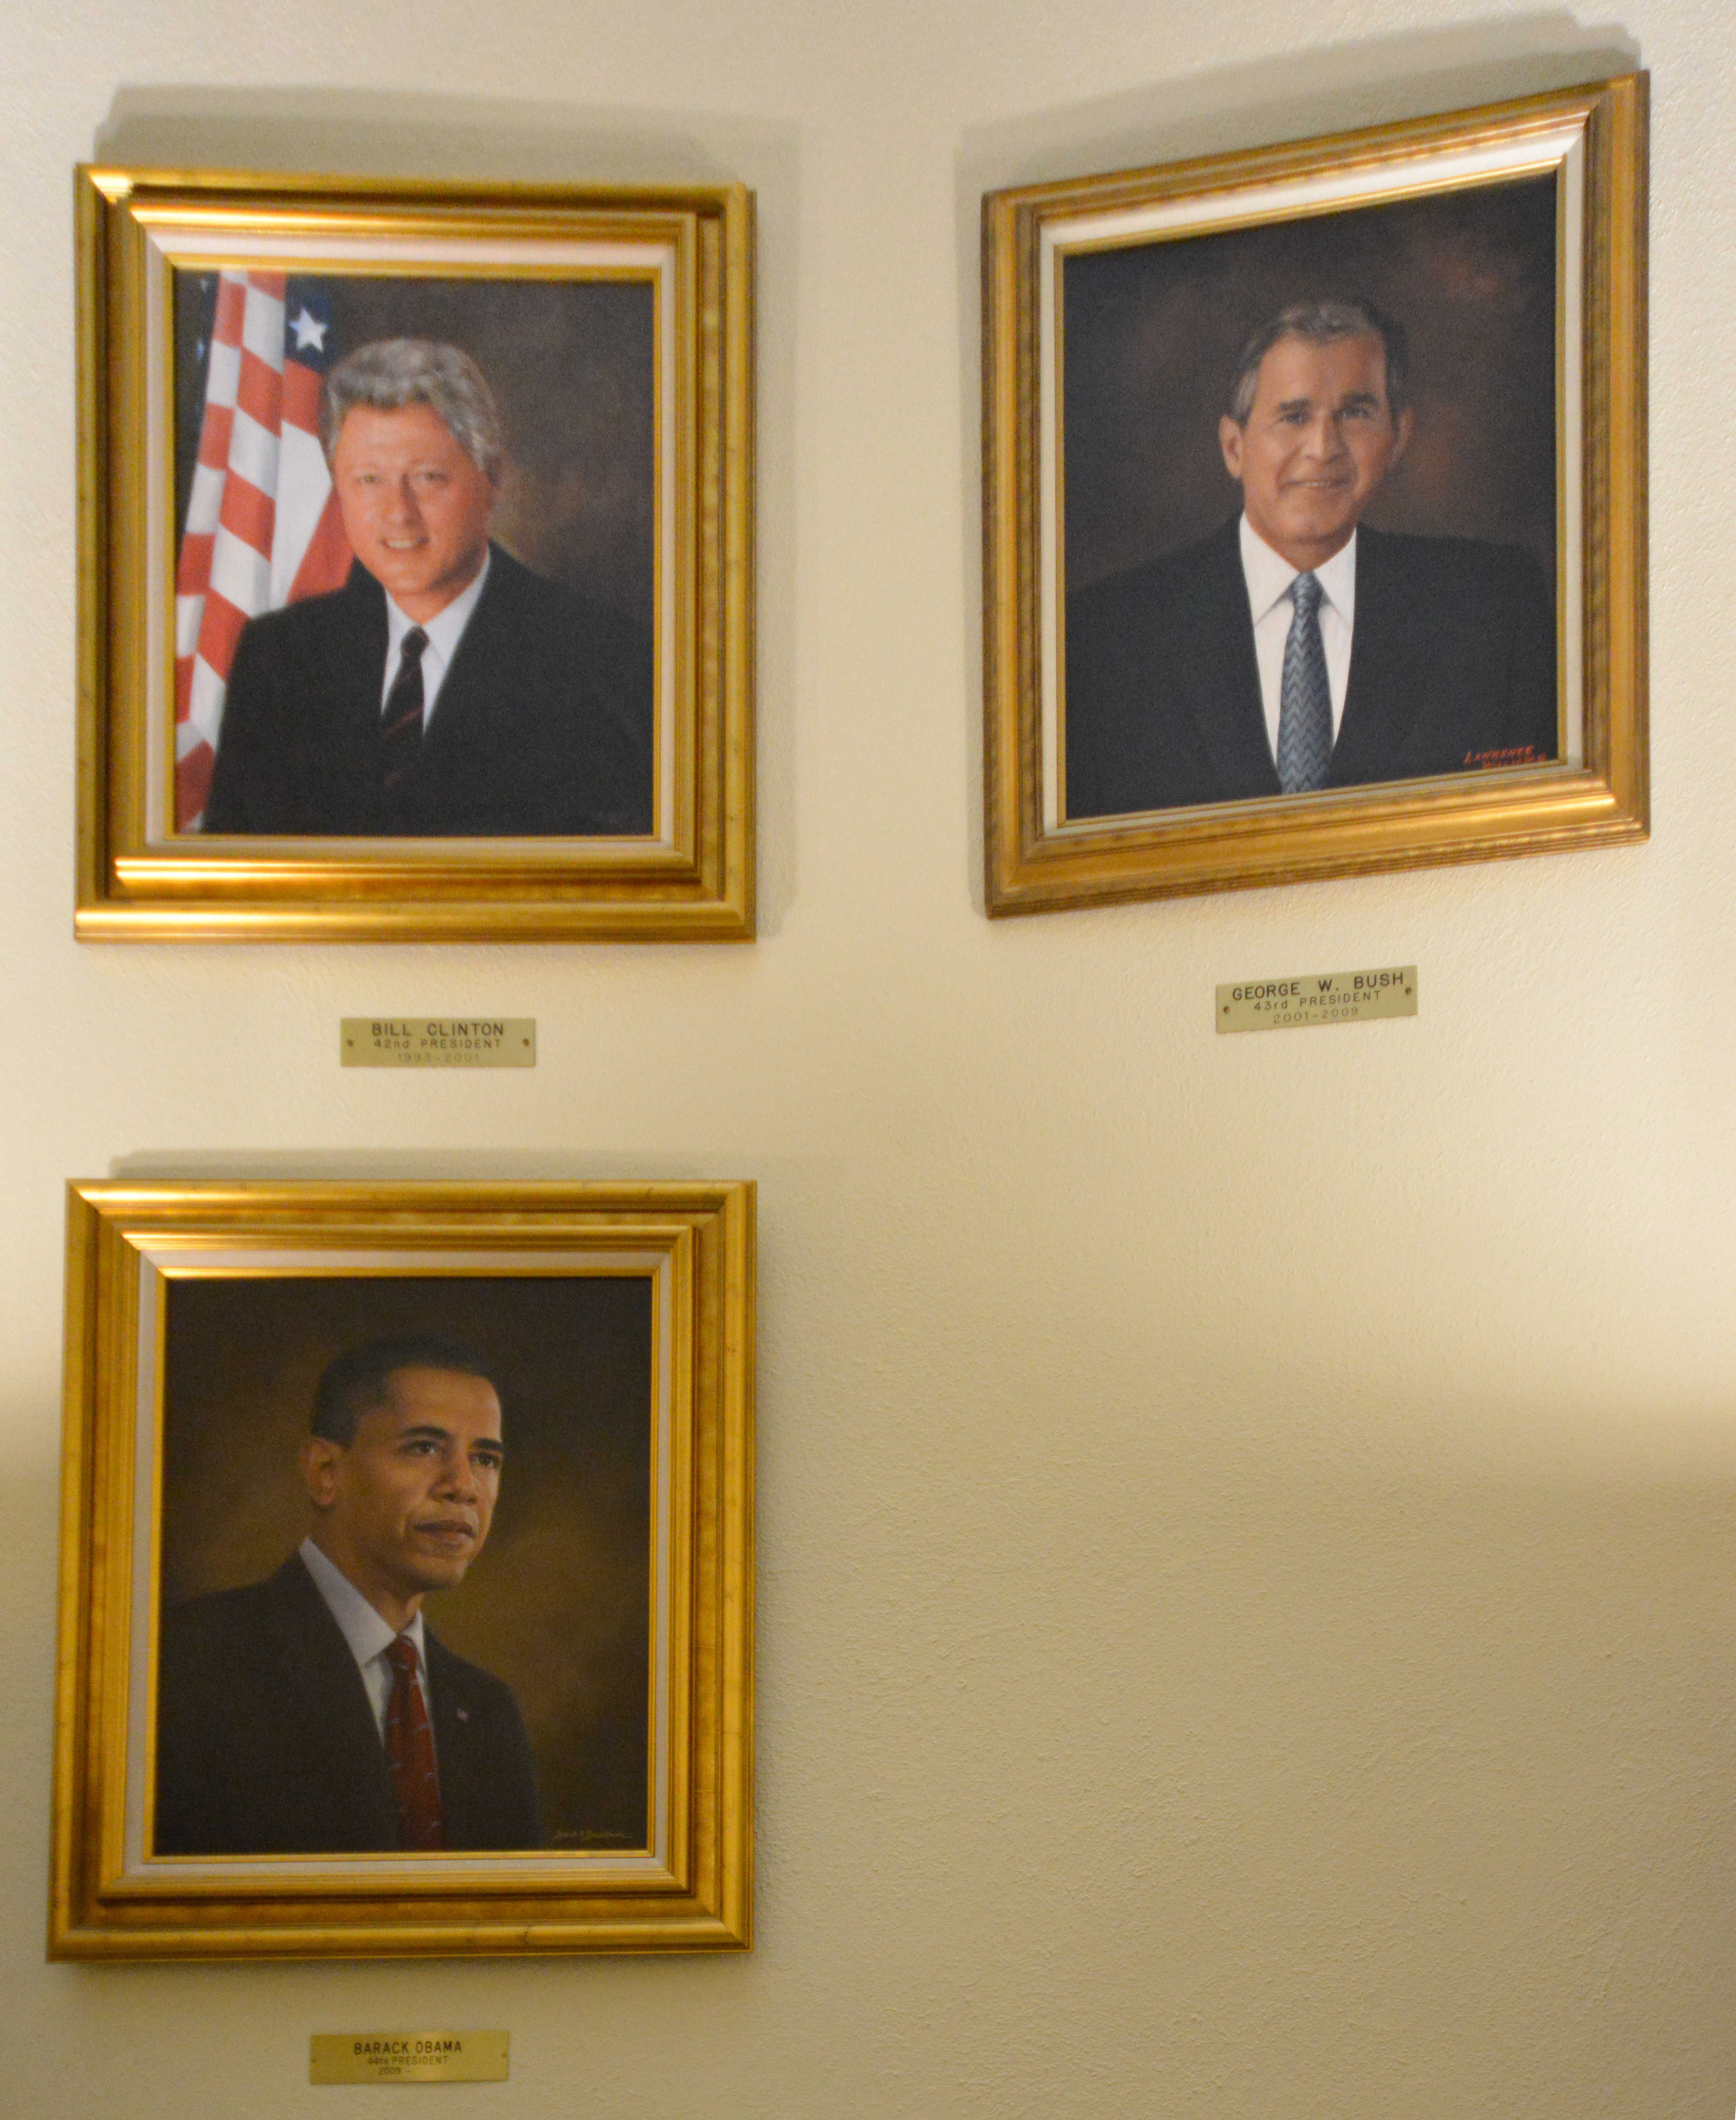 Portrait of President Trump missing from statehouse Gallery of Presidents